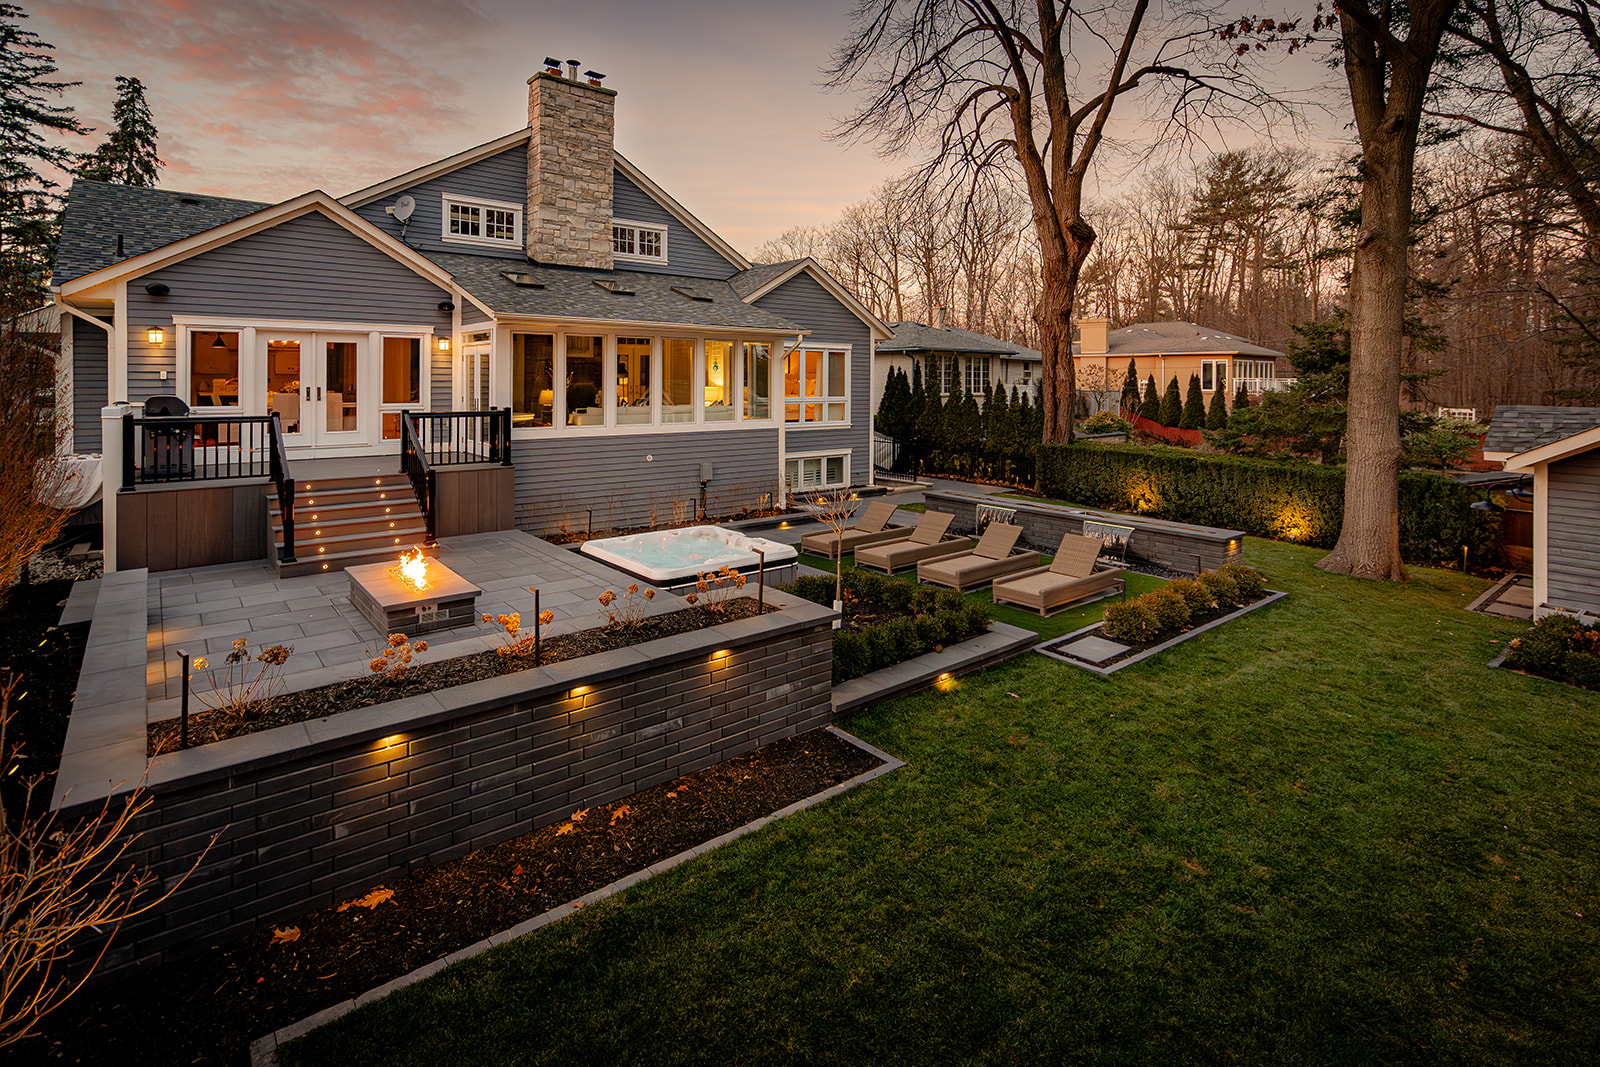 A backyard with lights on in the house.